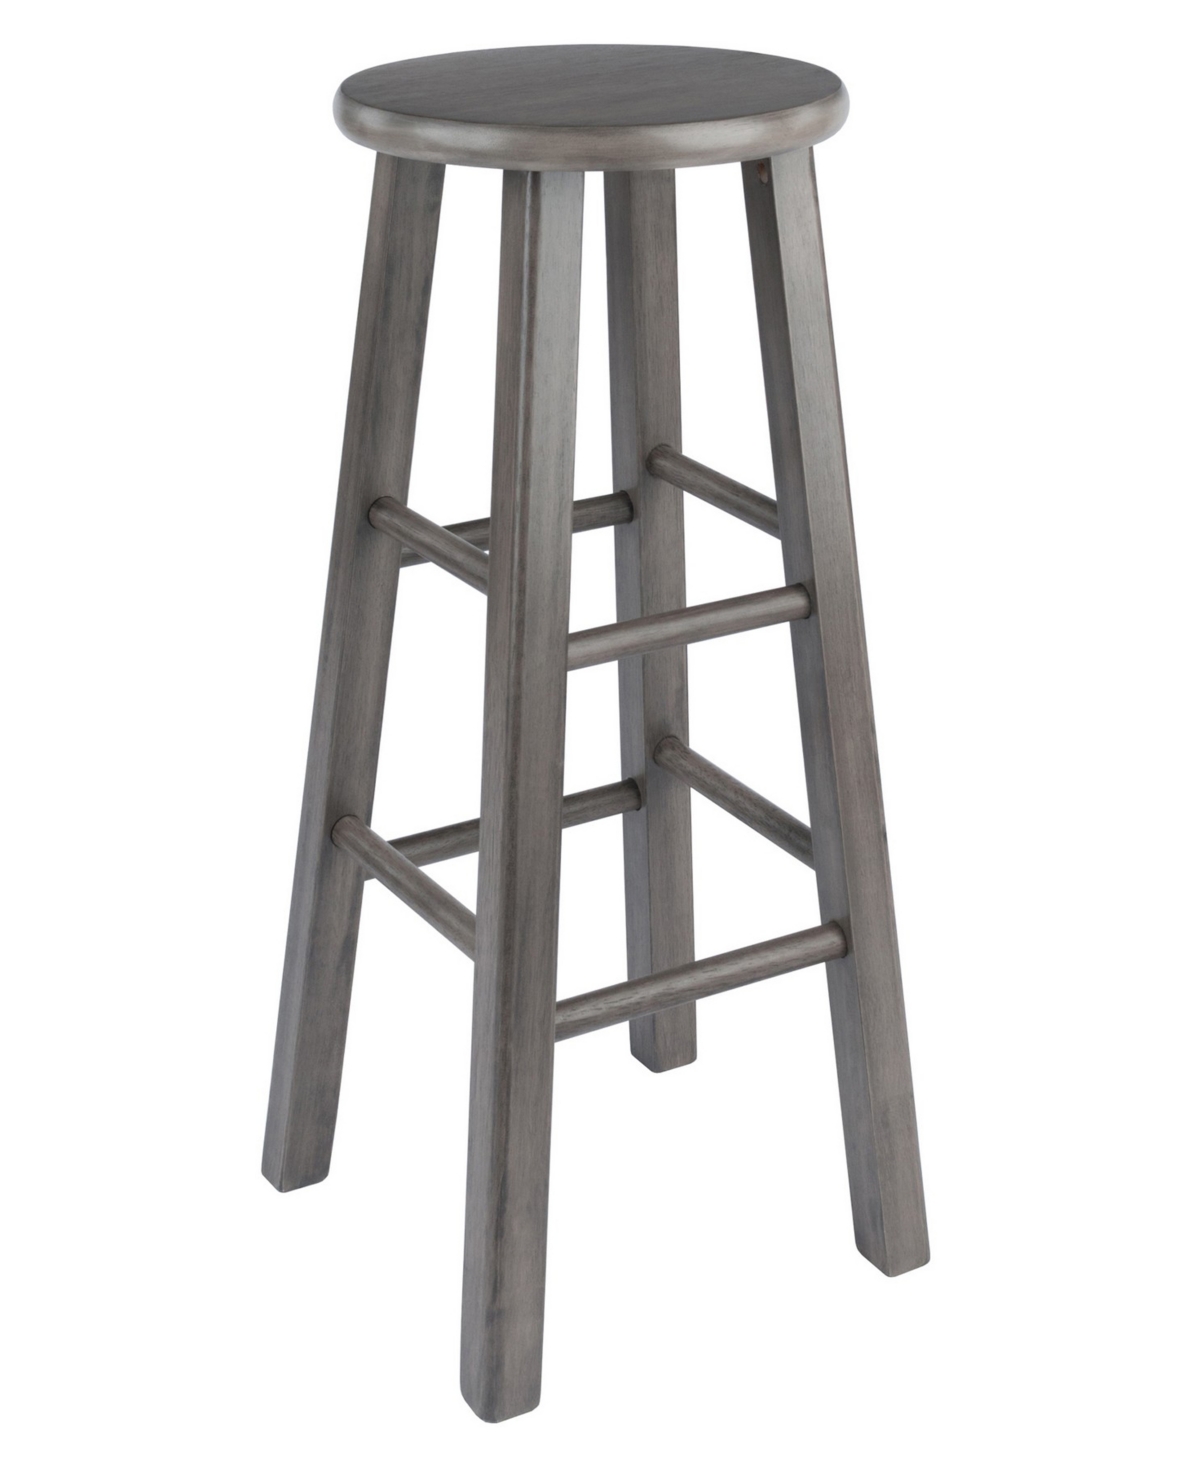 Winsome Ivy 29.1" Wood Square Leg Bar Stool In Rustic Gray